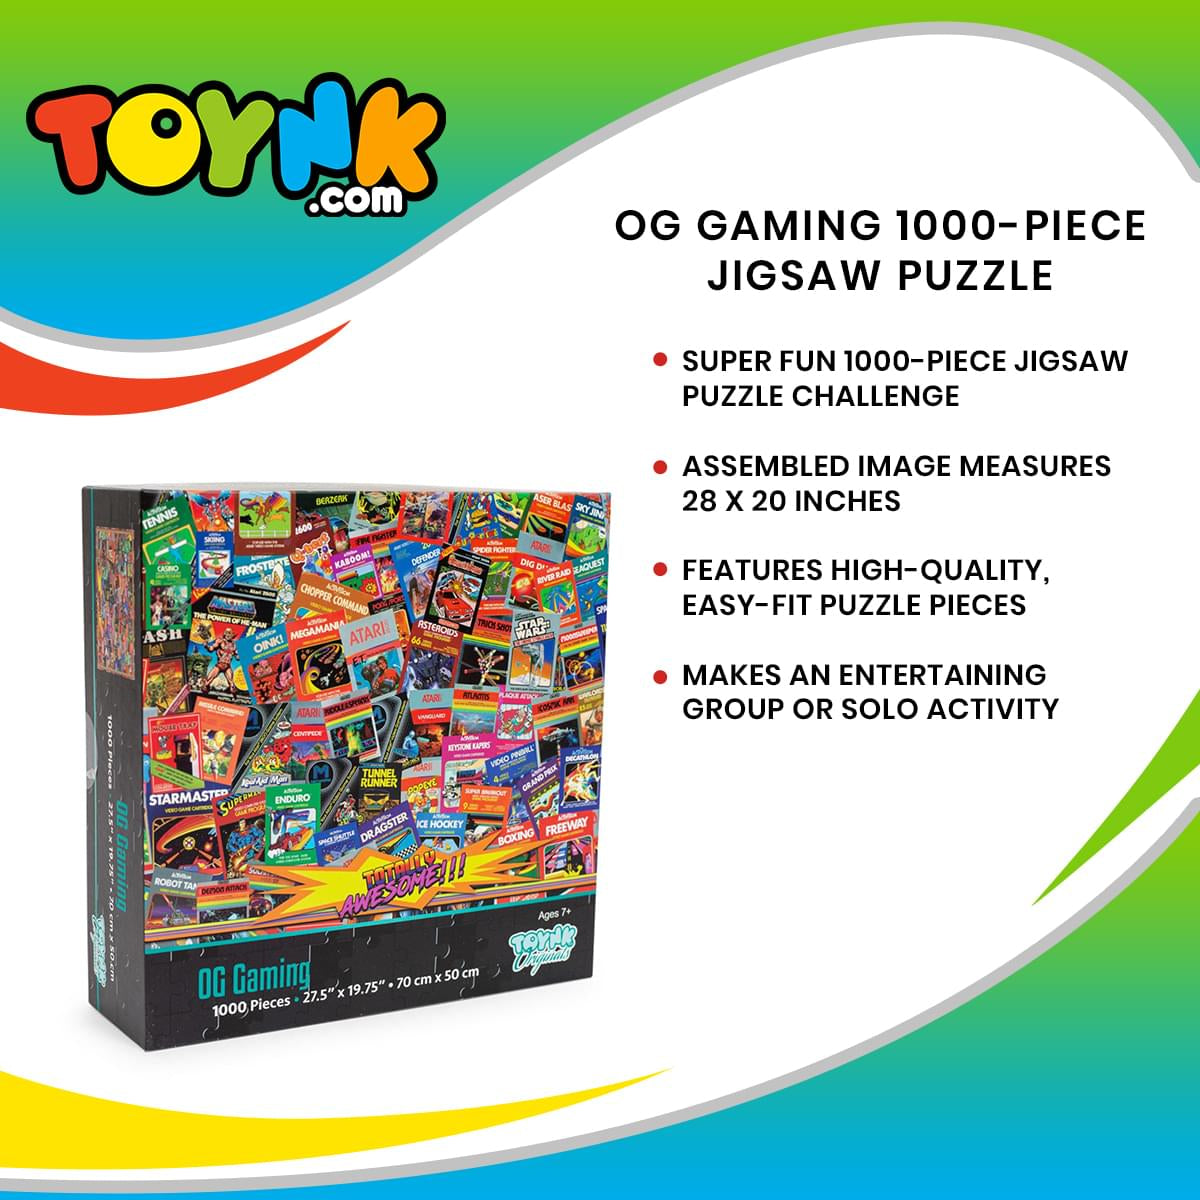 OG Gaming 1000-Piece Jigsaw Puzzle